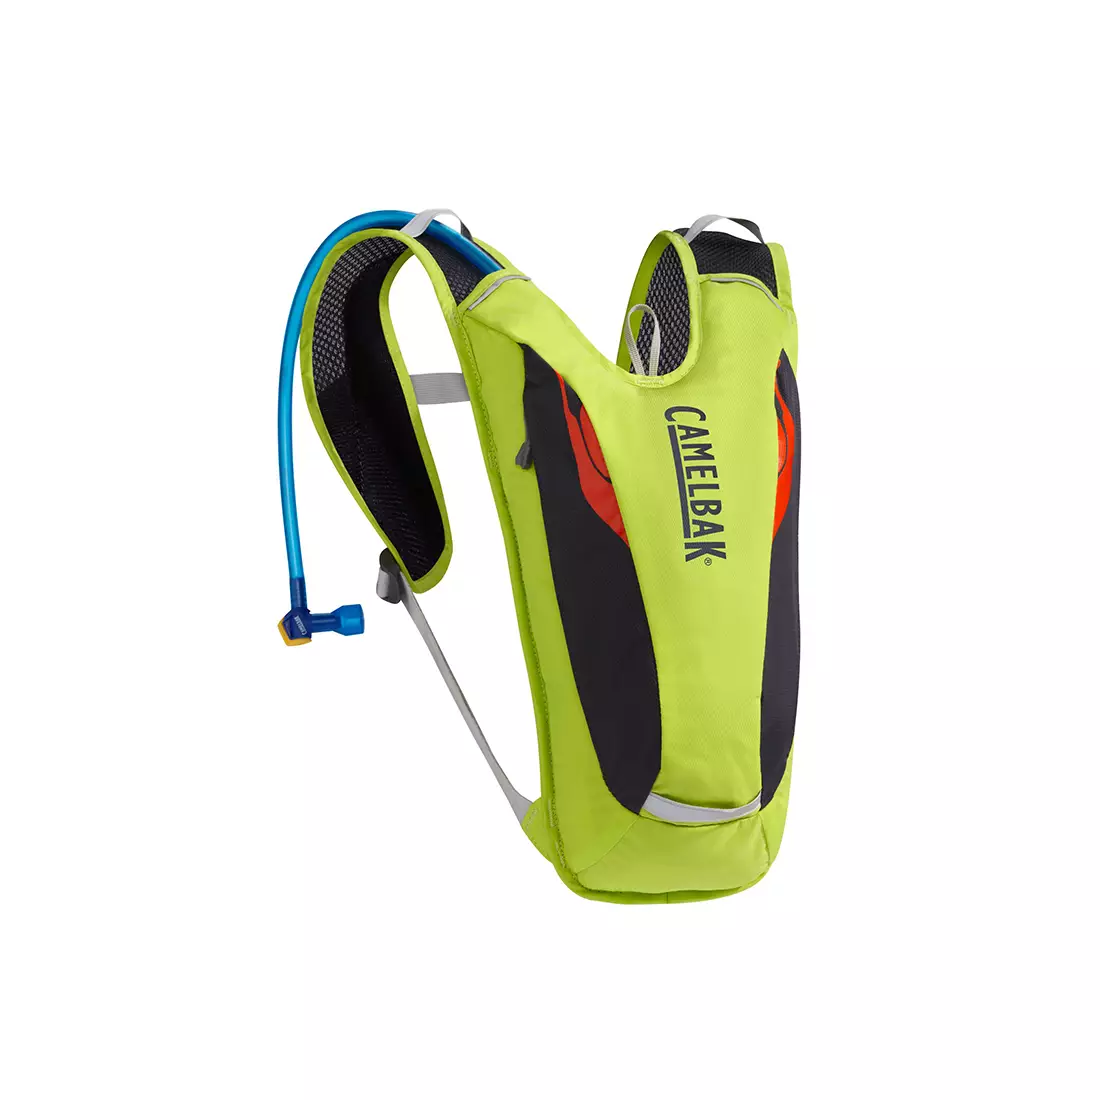 CAMELBAK backpack with water bladder Dart 50 oz / 1.5 L Lime Punch/Charcoal INTL 62355-IN SS16